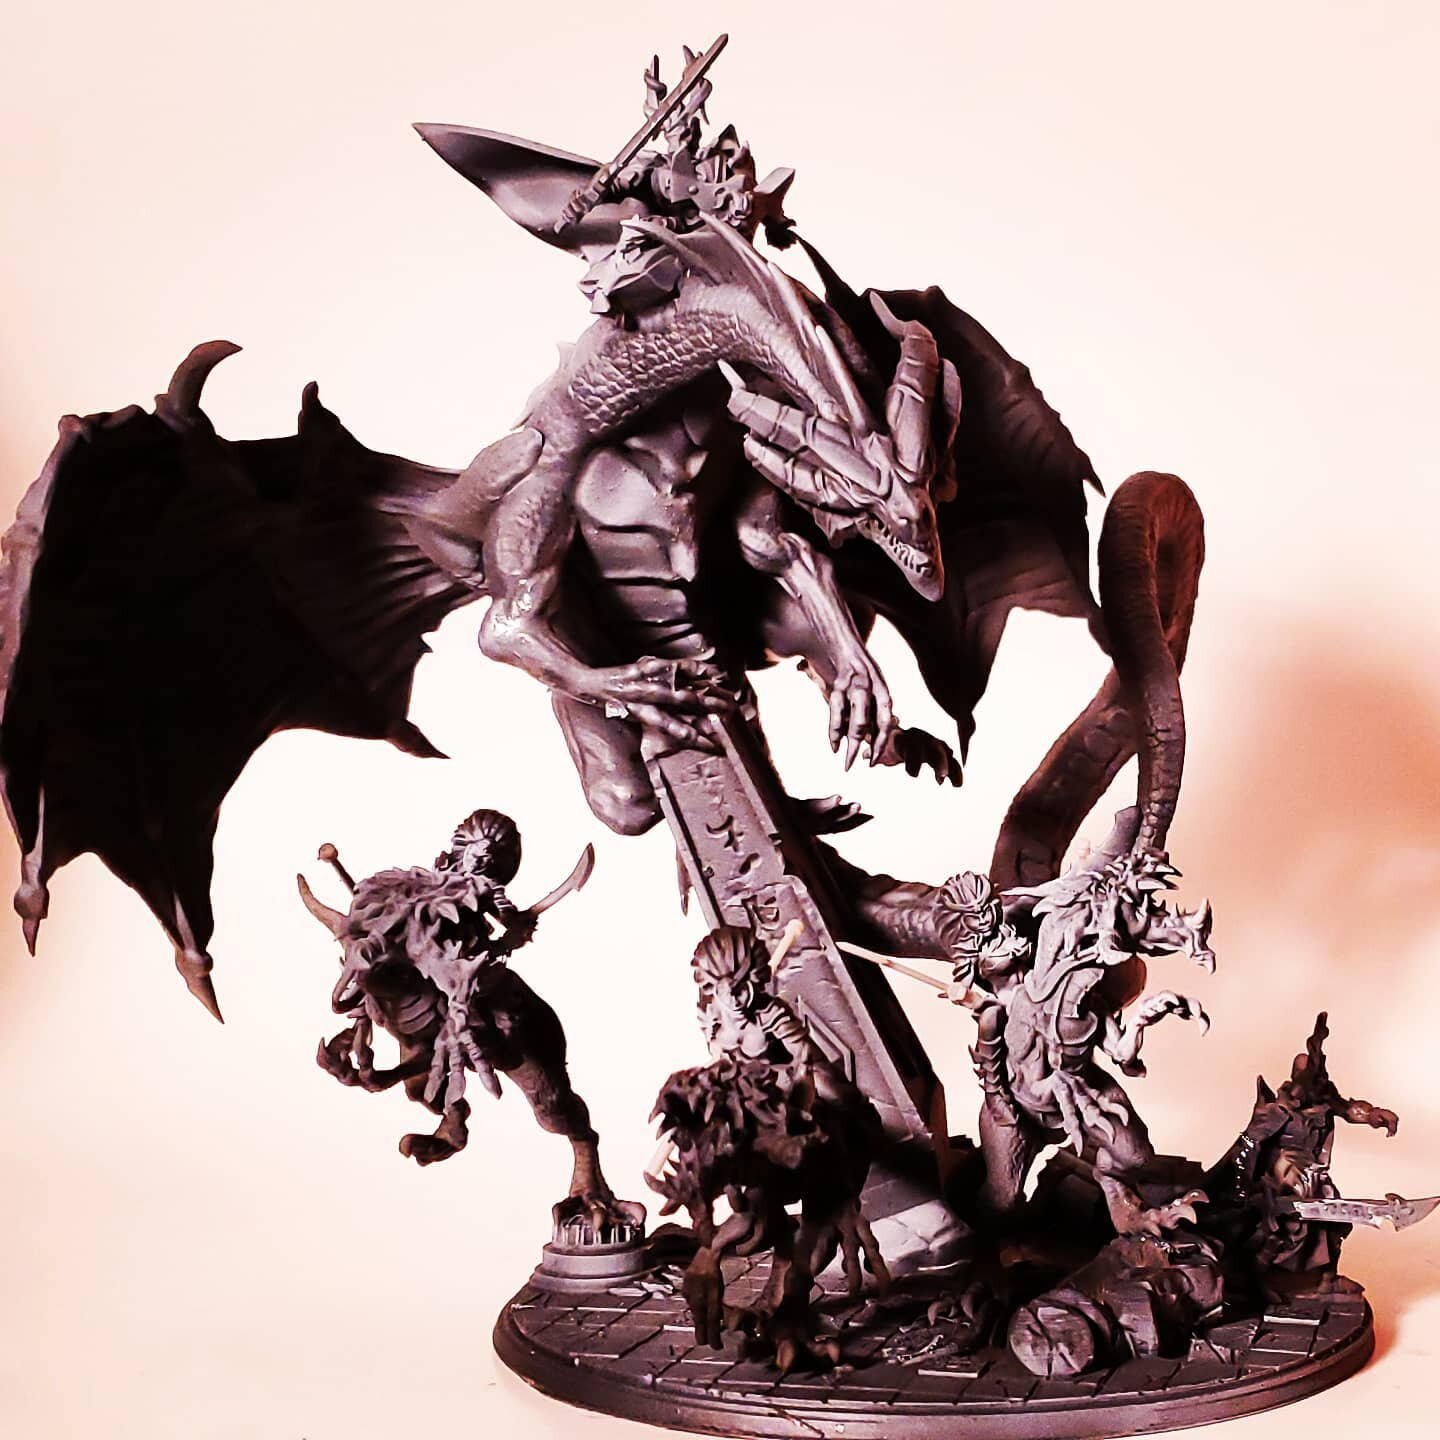 Def the most busy piece I've set up on my own. But I really like all of them together. #3dprinting #tabletopgames #dragonart all from most recent @ghamak_miniatures fantasy release.